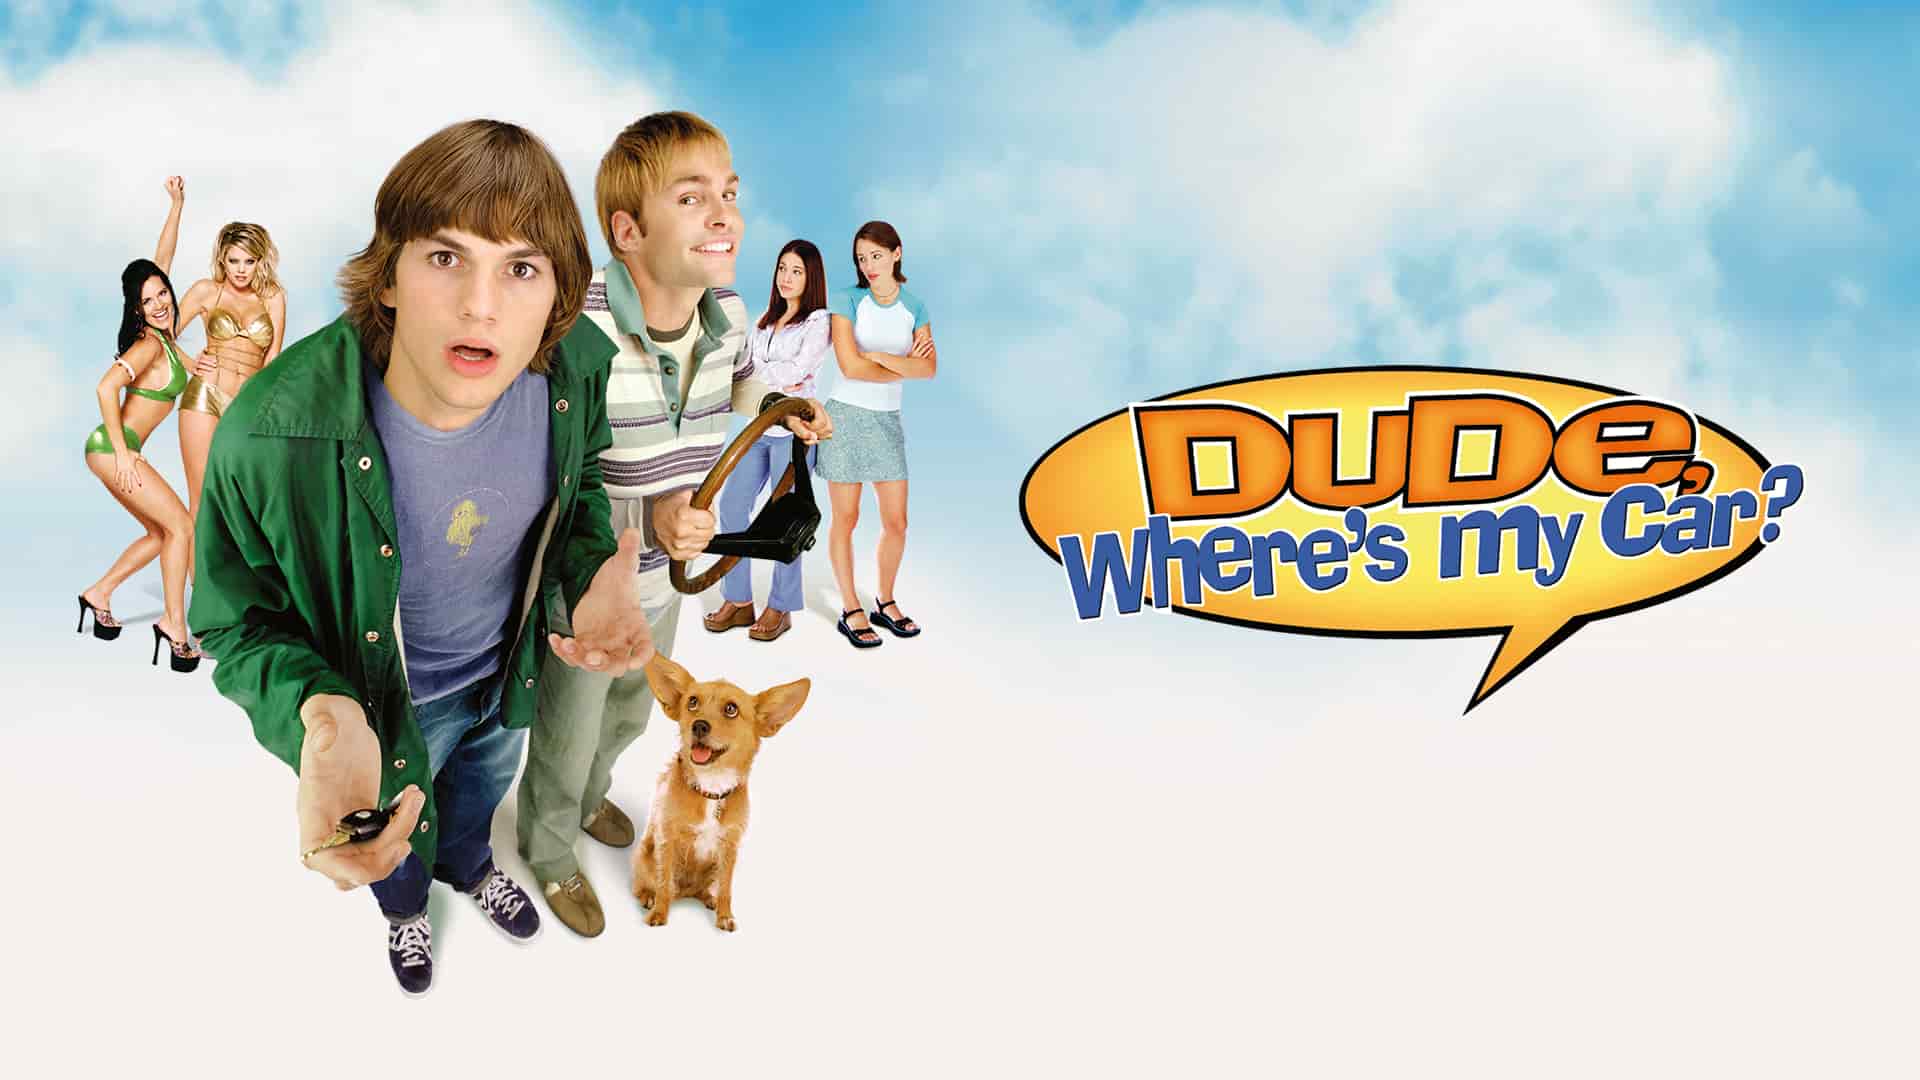 Title art for comedy movie Dude, Where’s My Car?